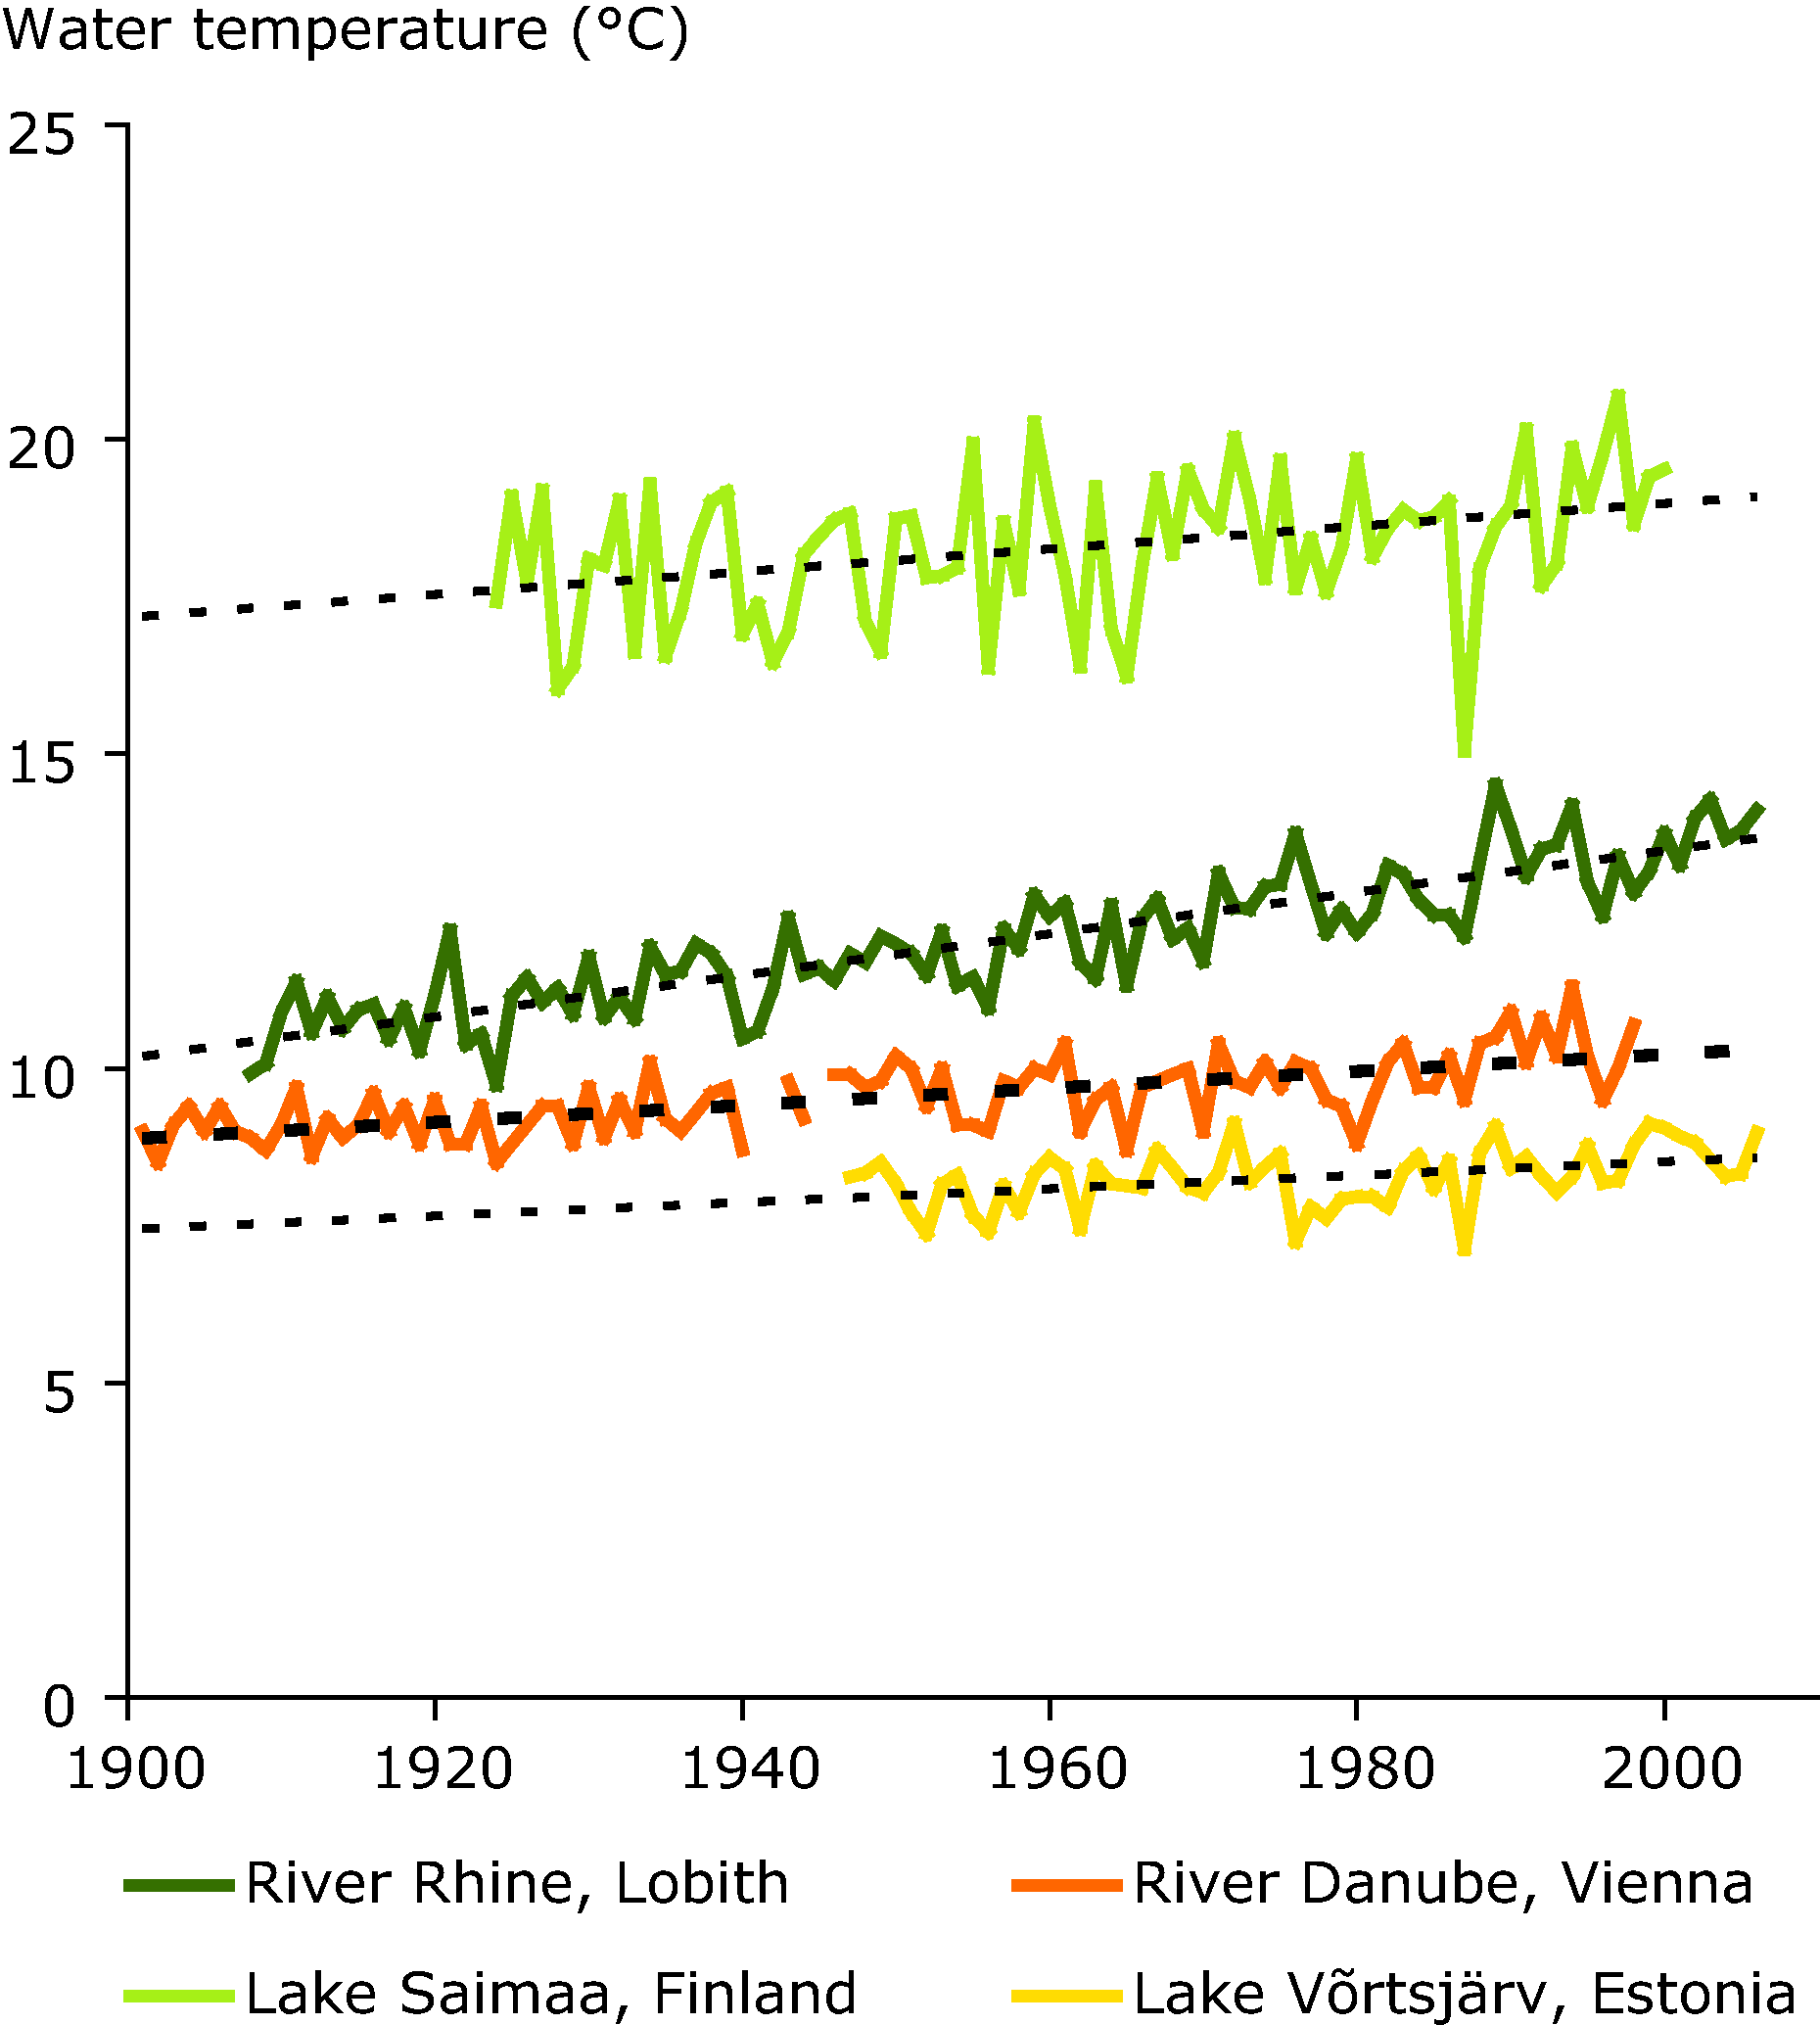 Water temperatures in four selected European rivers and lakes in the 20th century